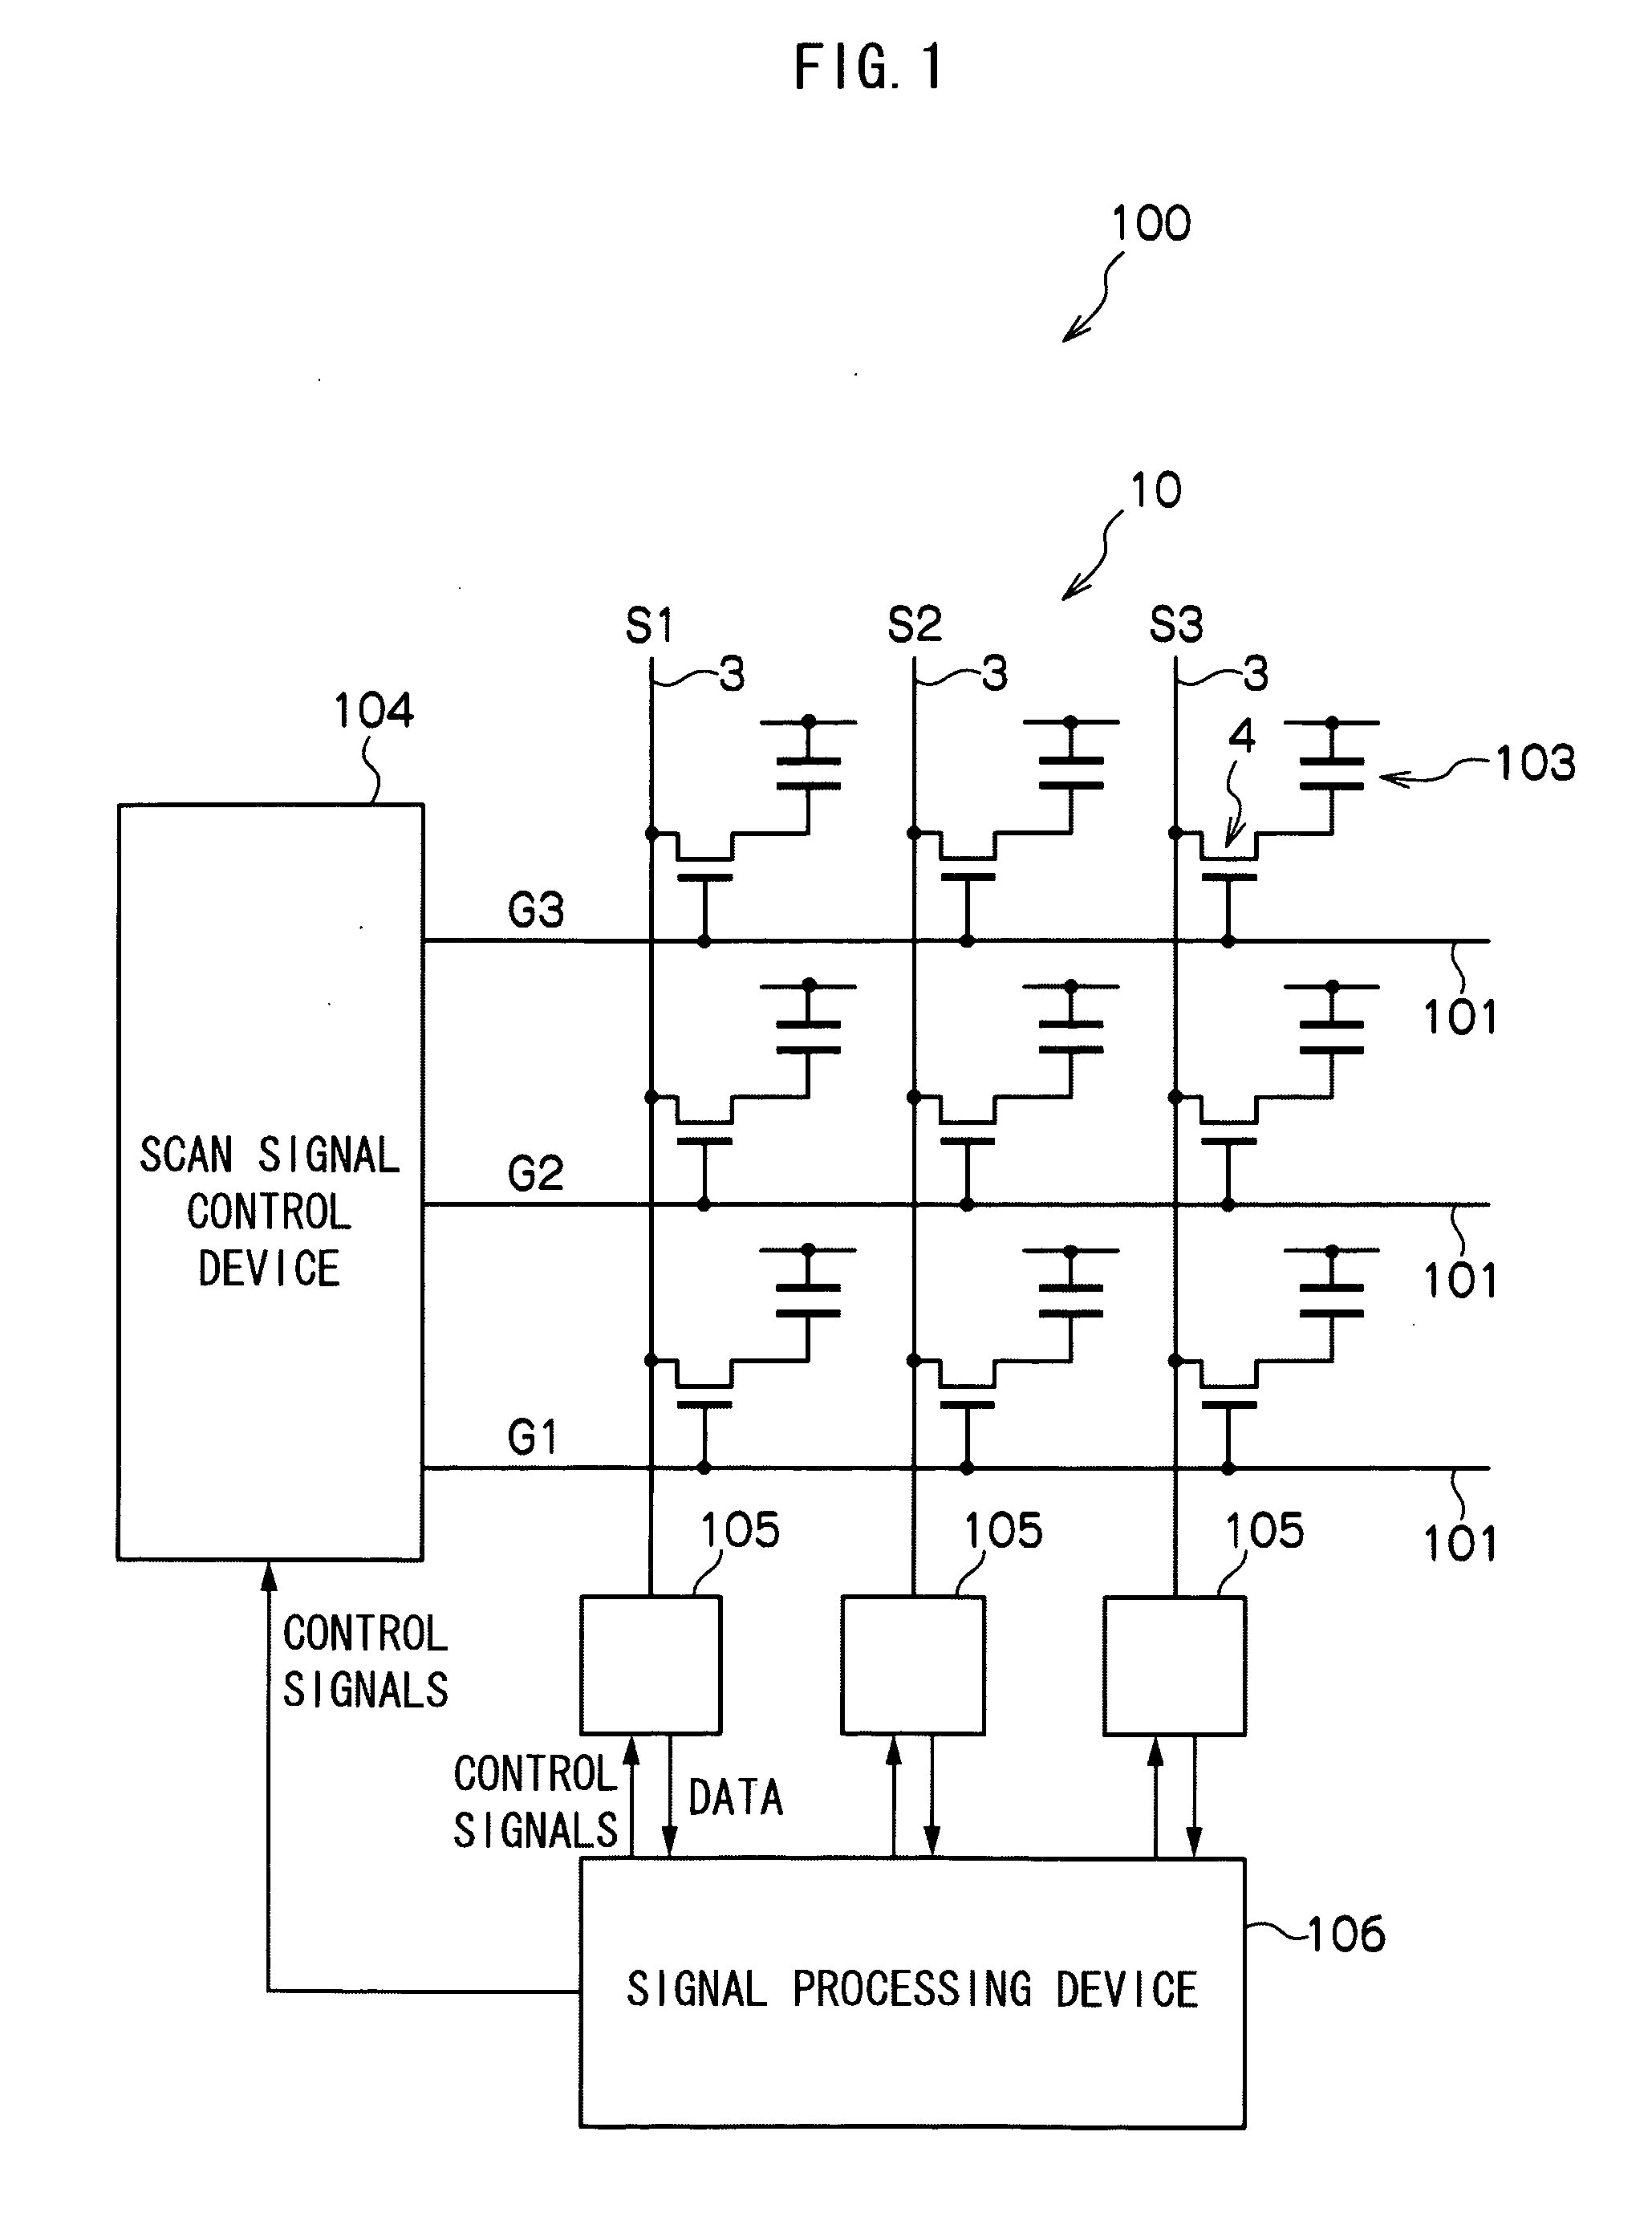 Electromagnectic wave detecting element